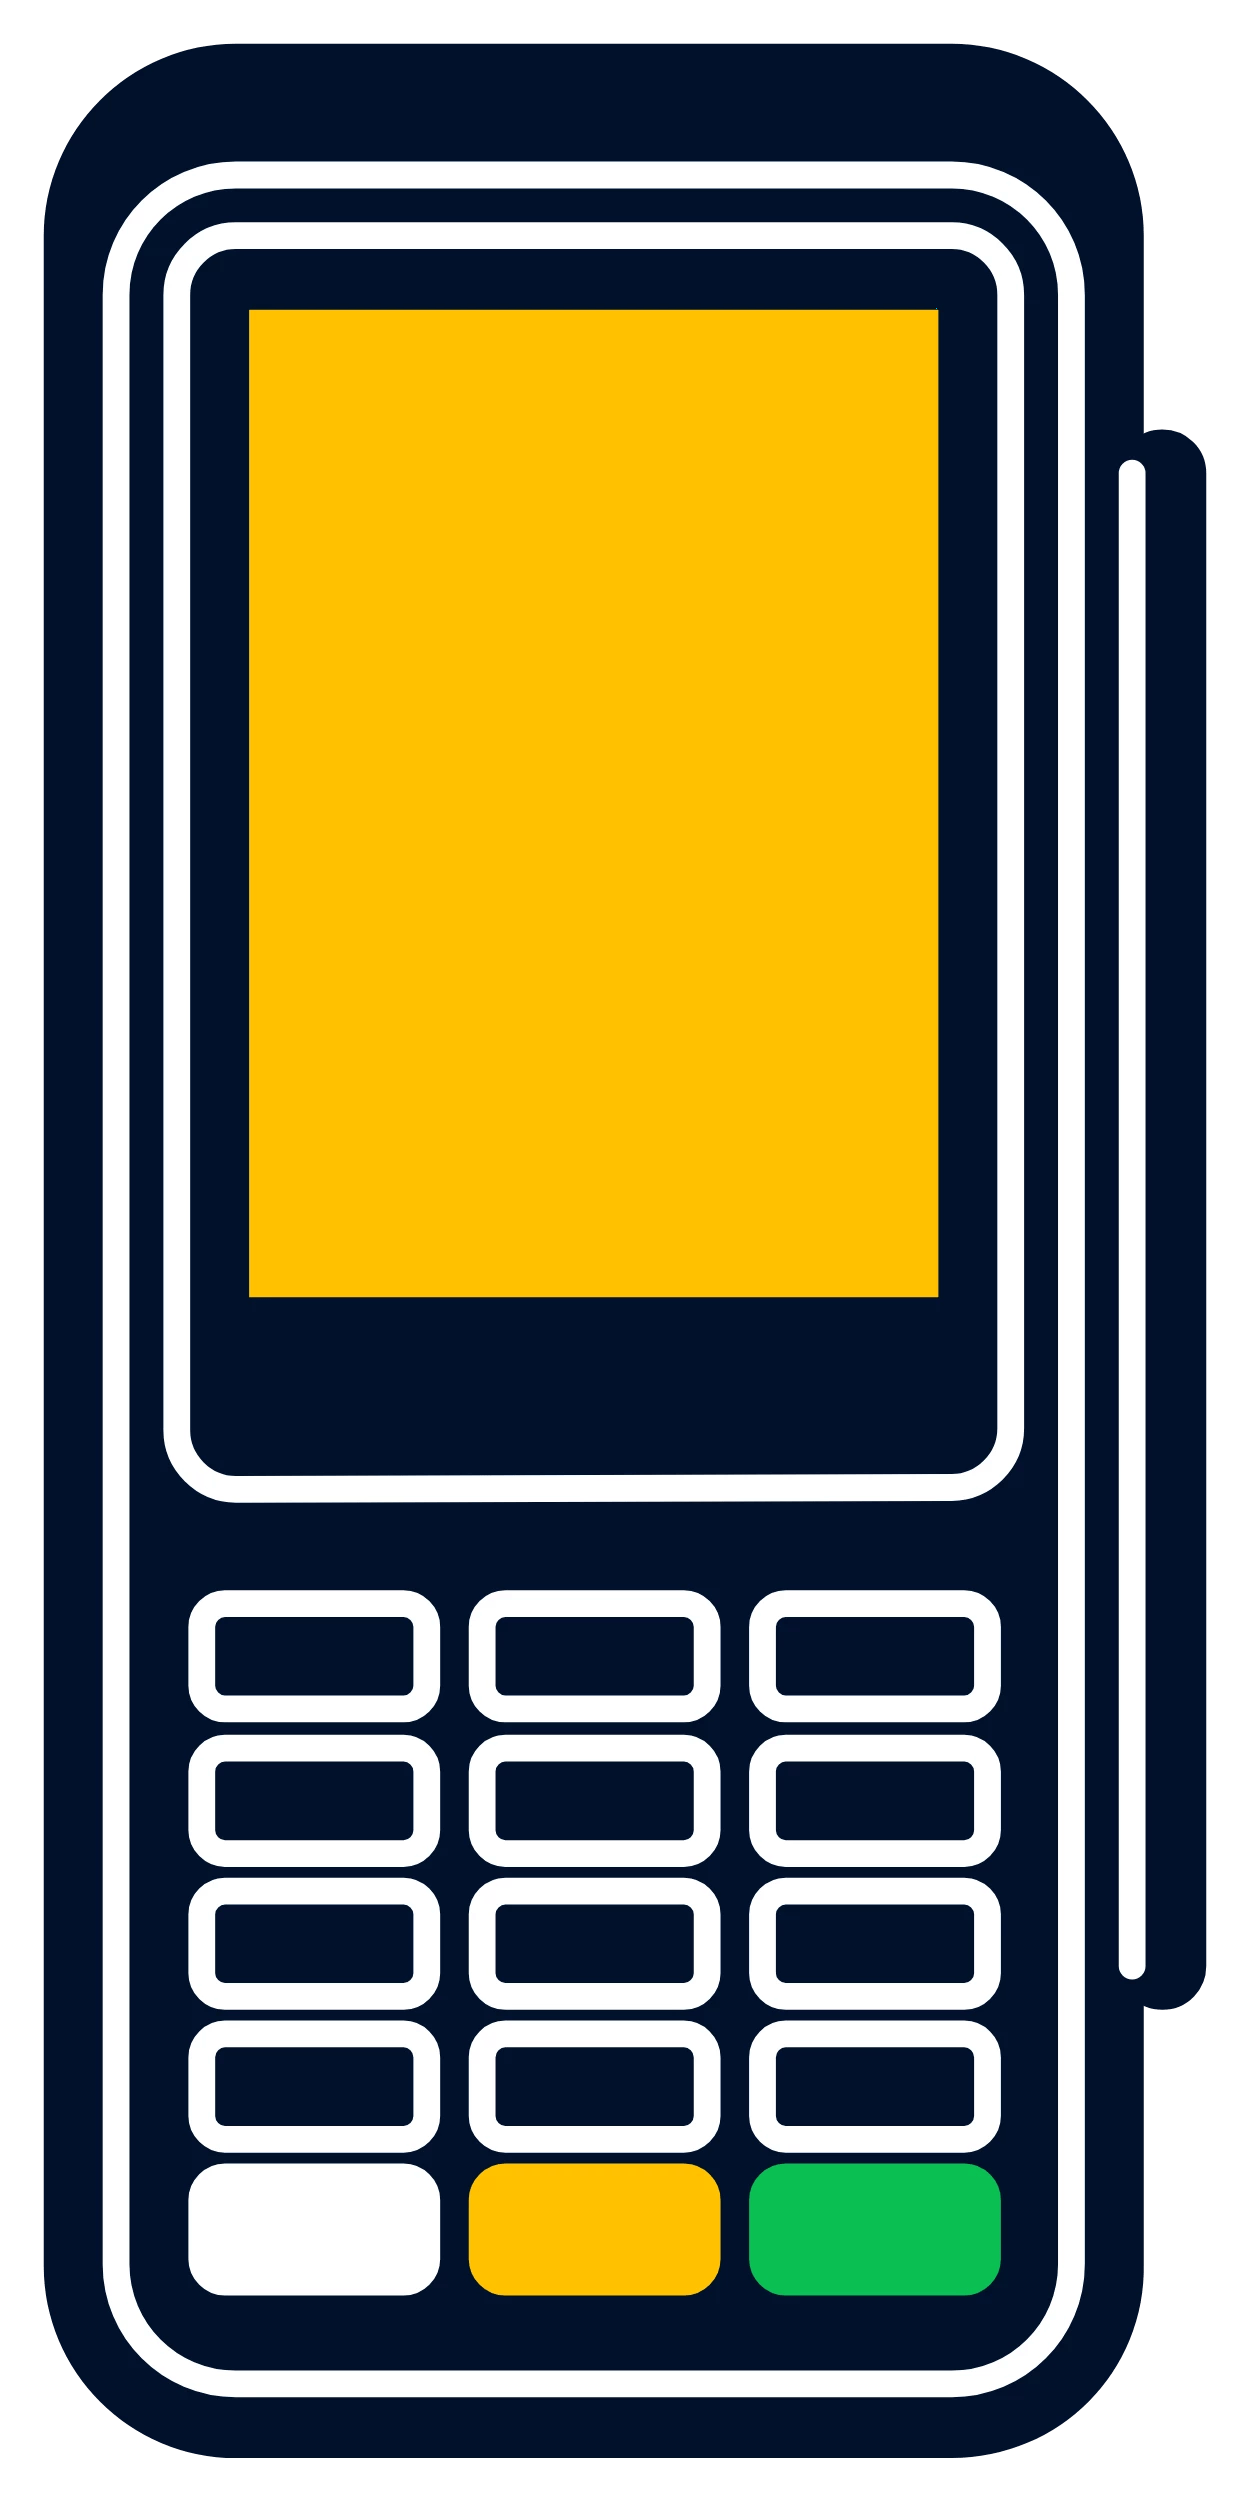 A terminal and a credit card to demonstrate countertop payments